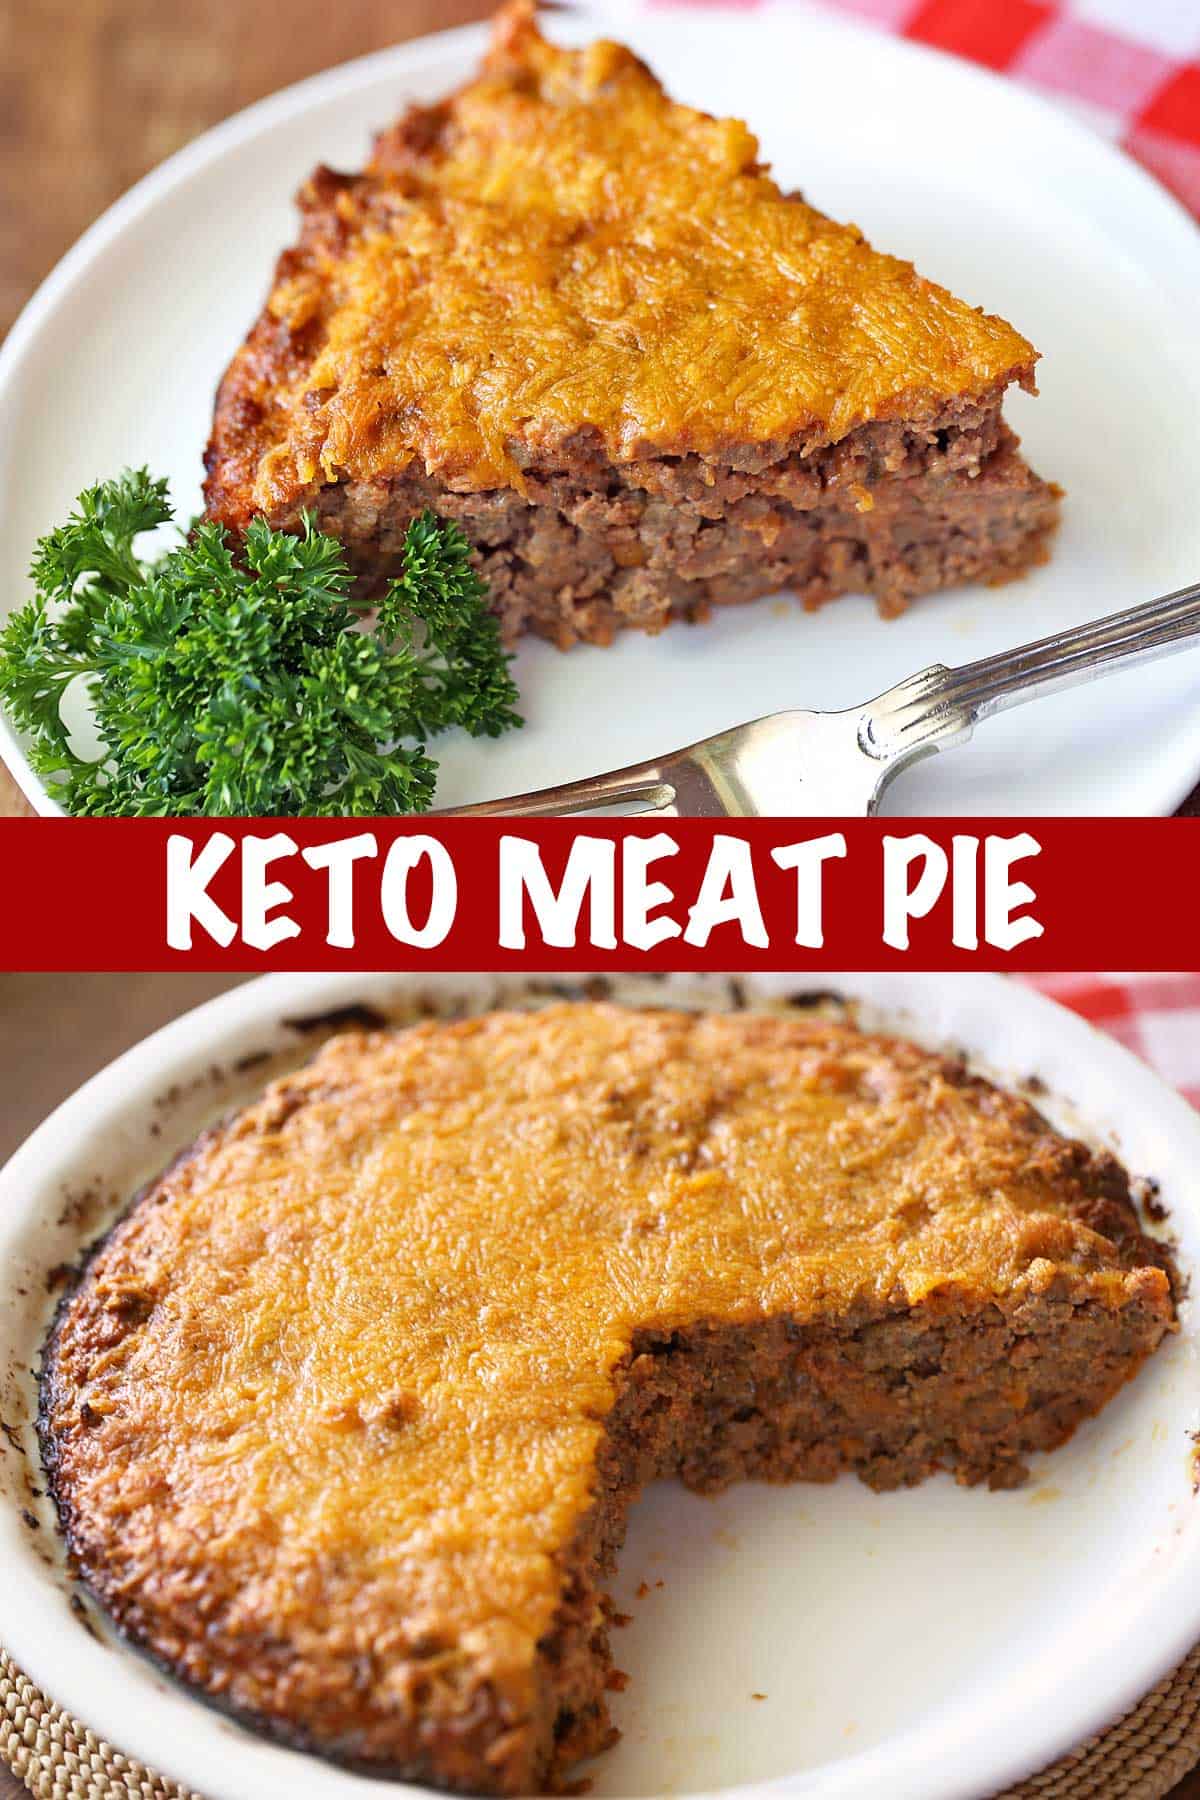 Two photos of a meat pie: the whole pie and a slice on a plate.